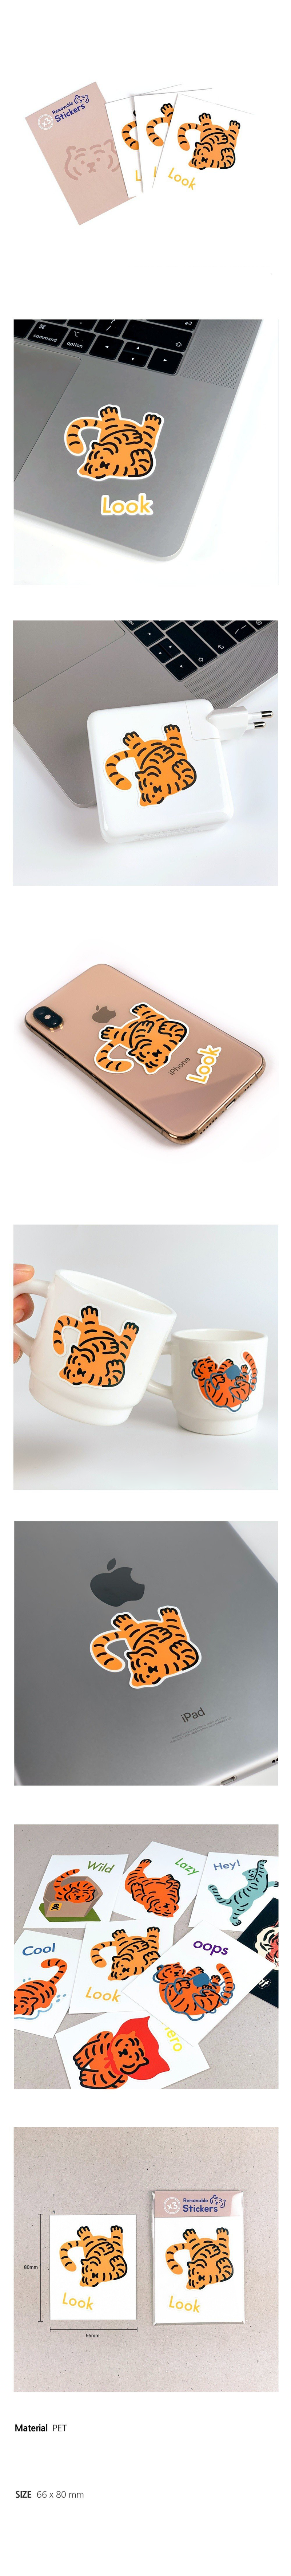 Look tiger removable sticker